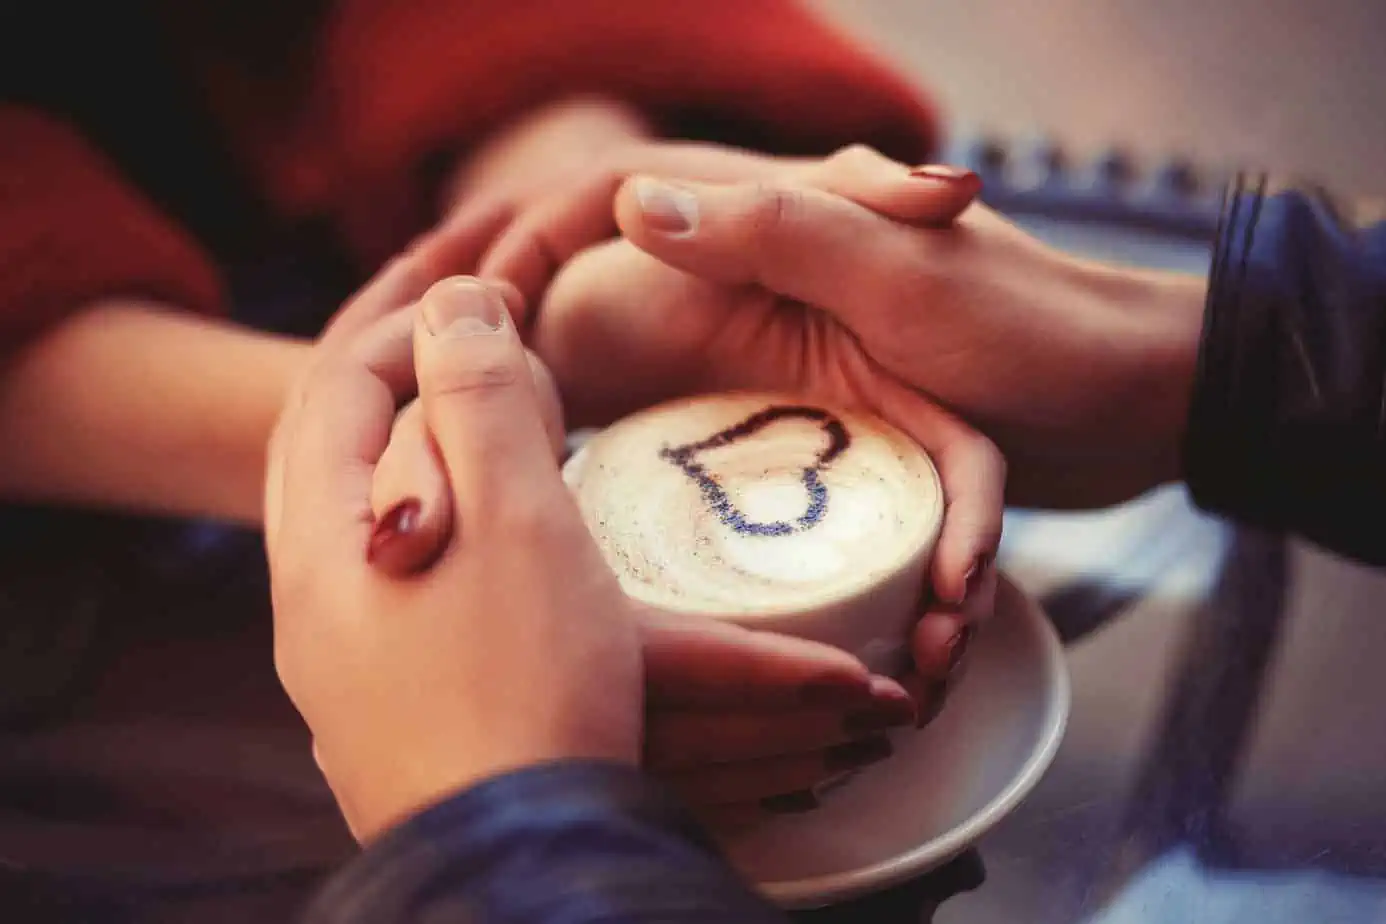 Two people holding a coffee cup with a smiley face drawn on it